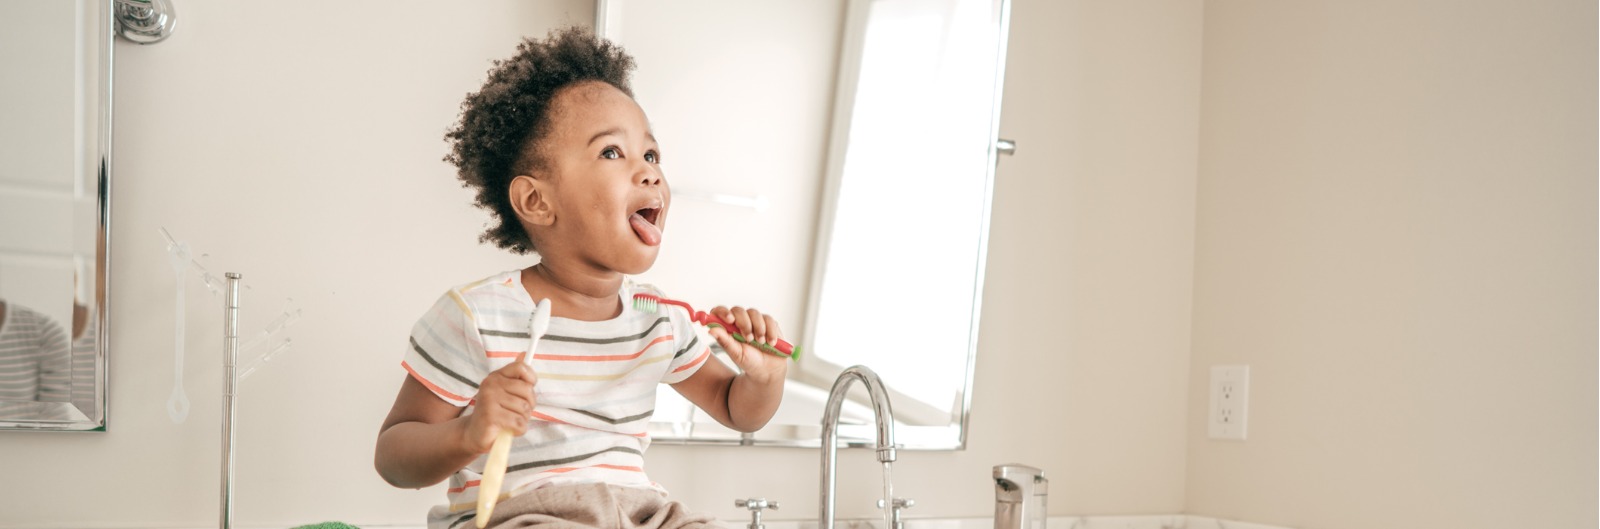 oral-hygiene-for-kids-picture-1600x529.jpg